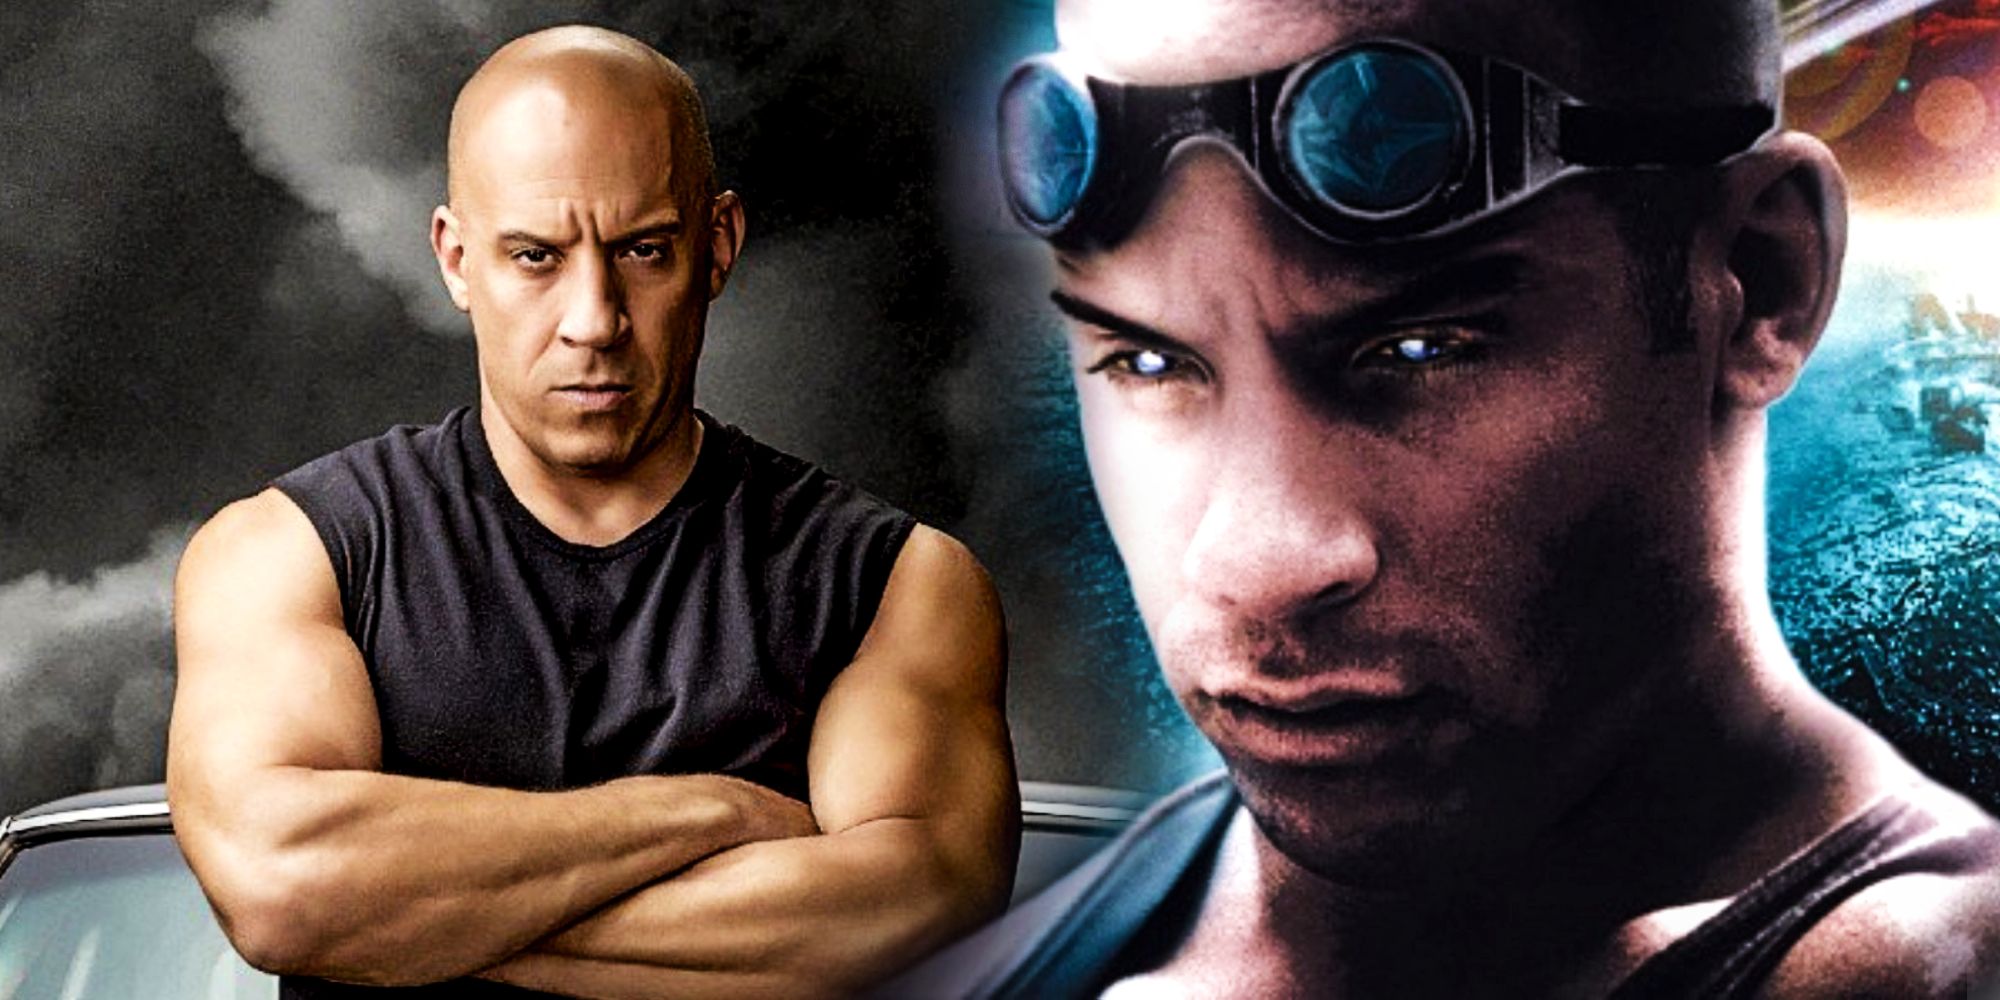 Vin Diesel as Dominic Toretto in Fast & Furious and Riddick in Pitch Black